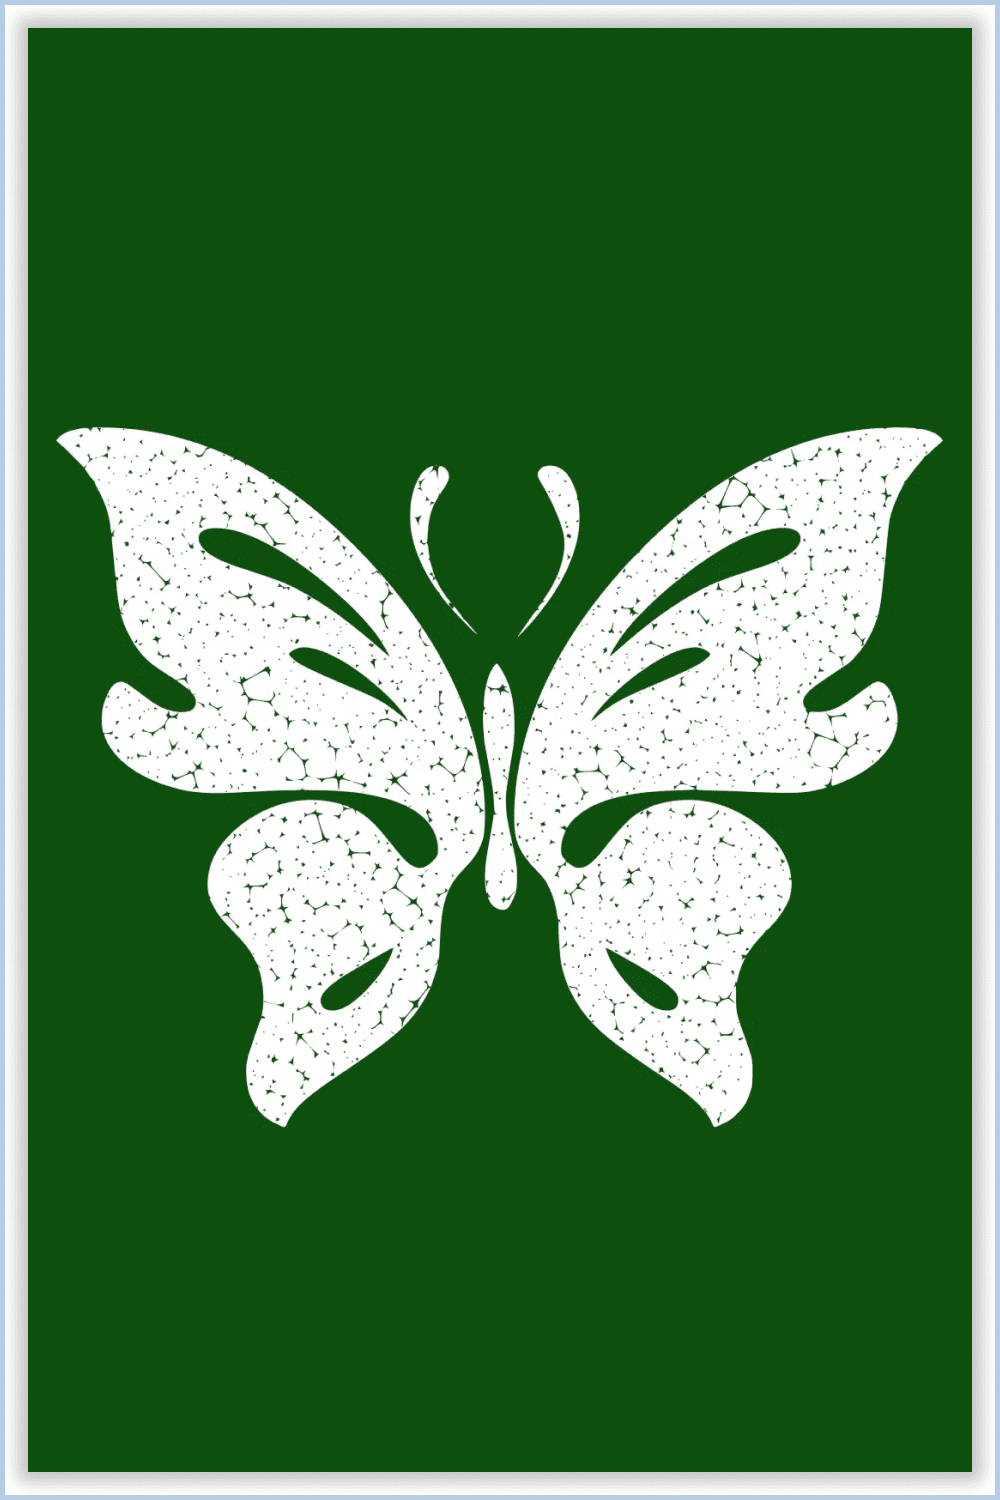 Stylized image of a butterfly in white on a green background.